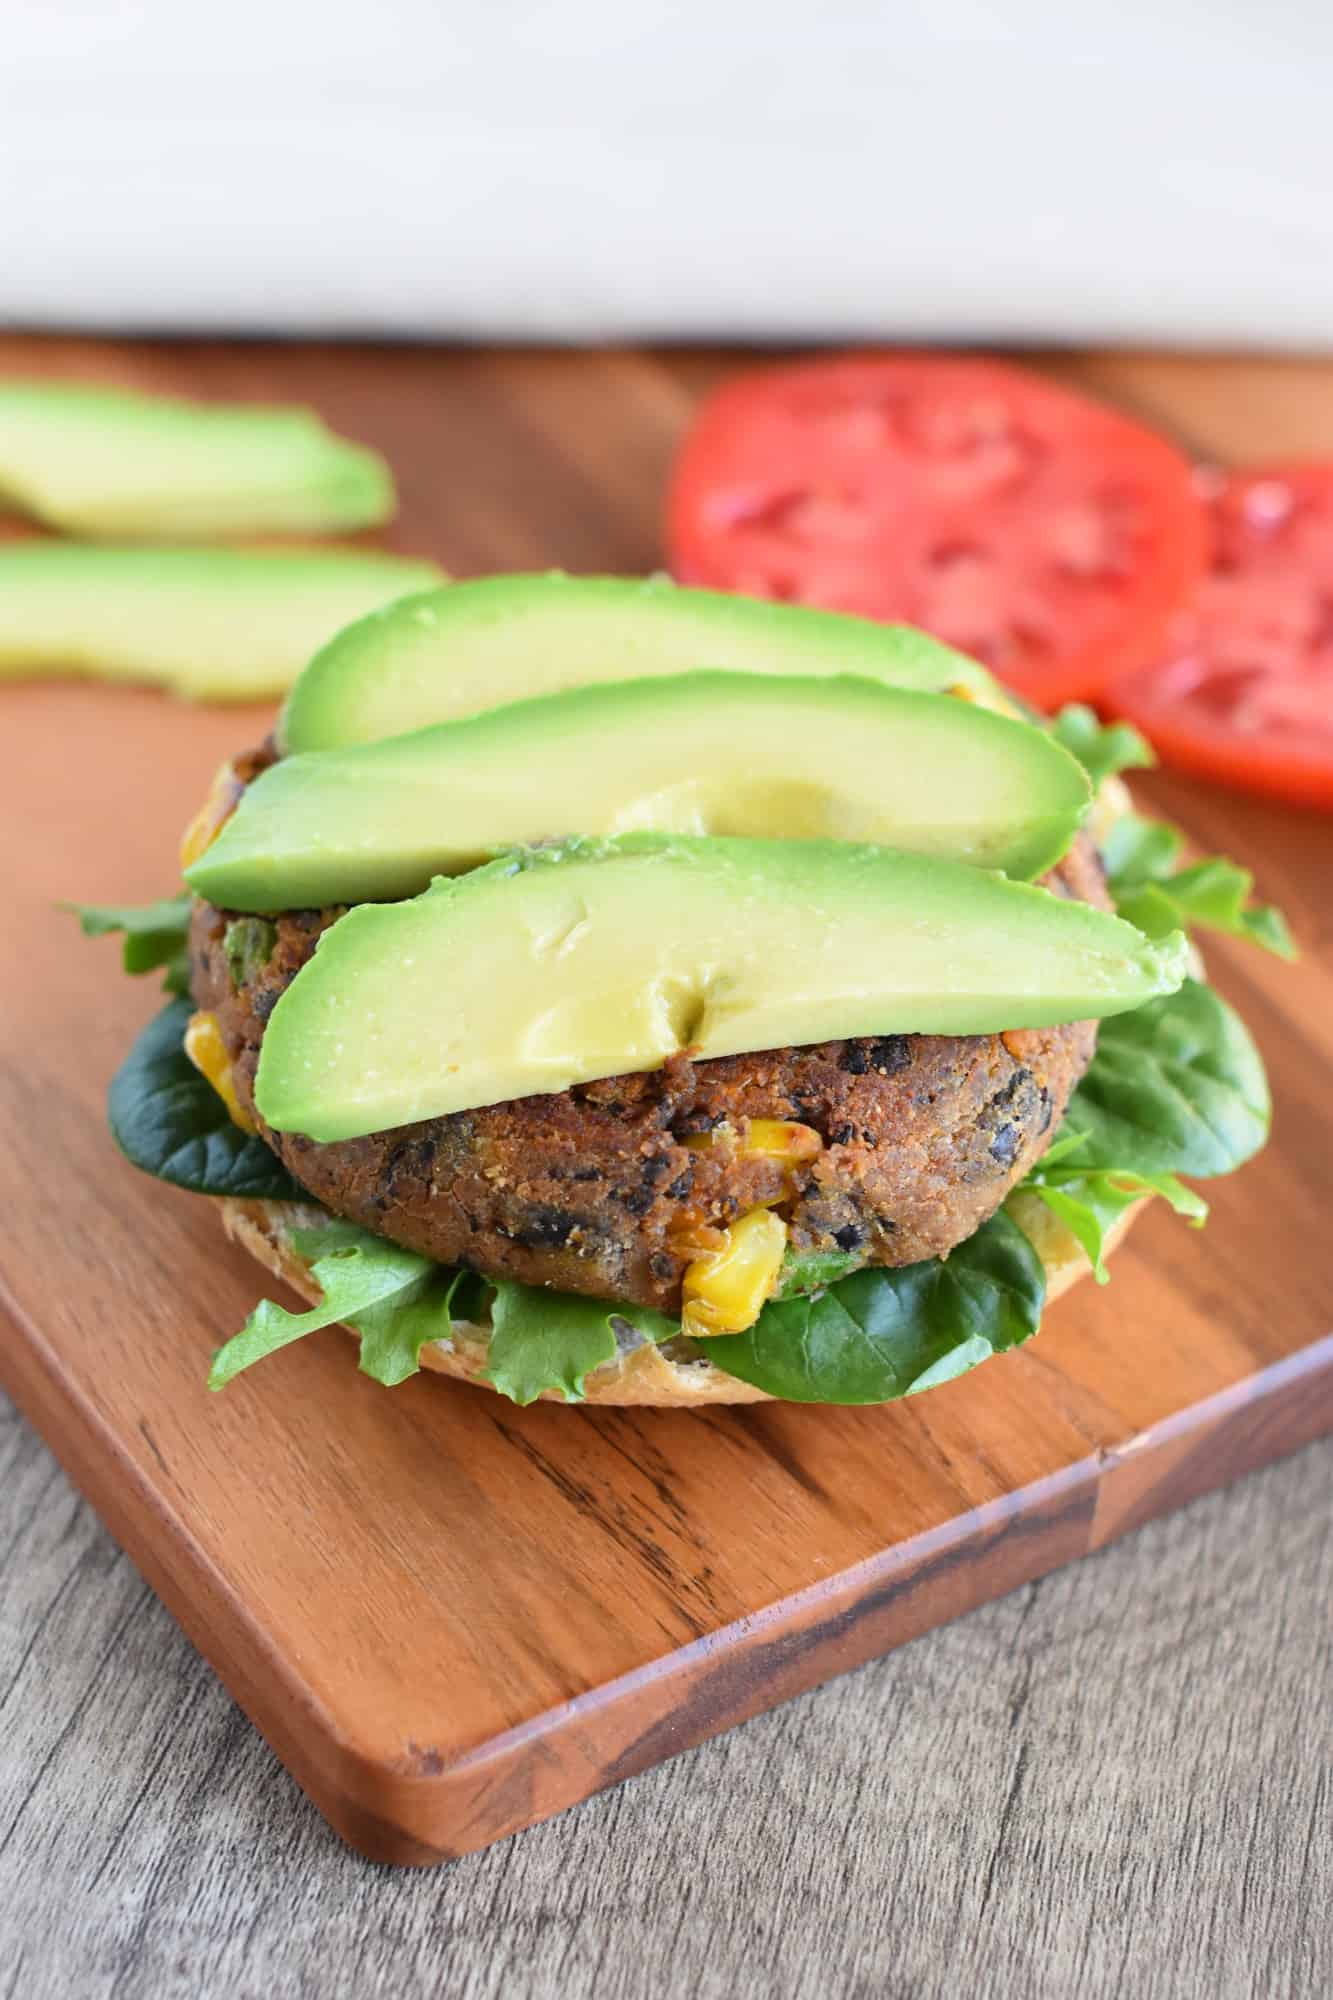 burger on bun with lettuce topped with sliced avocado on a wooden board with avocado and tomato slices in the background